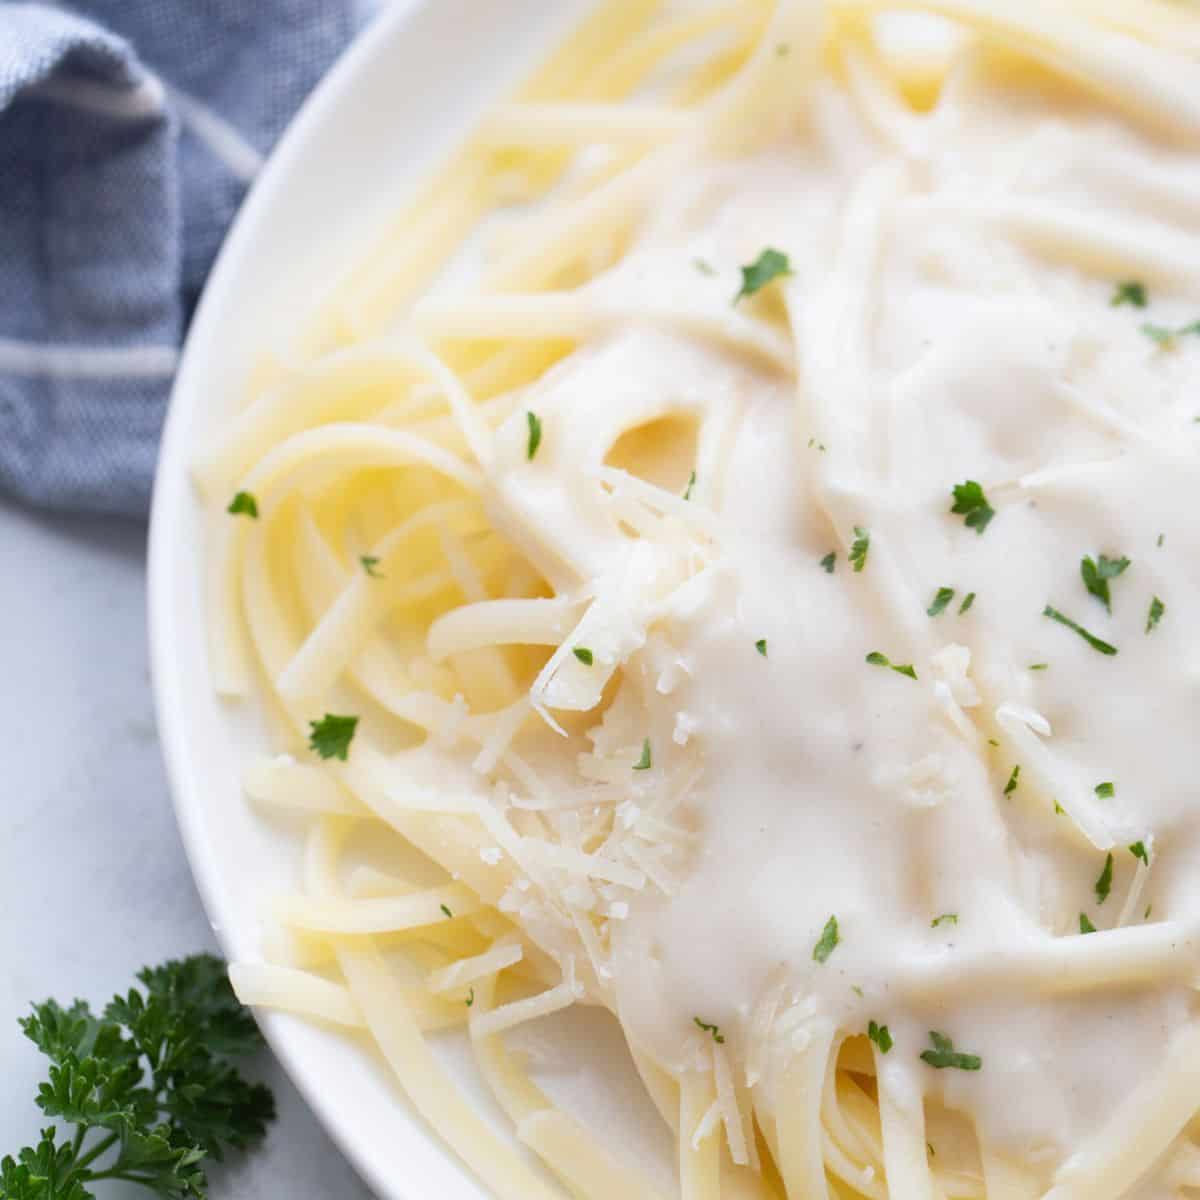 A plate of healthy alfredo sauce over a bed of gluten free fettuccini noodles.